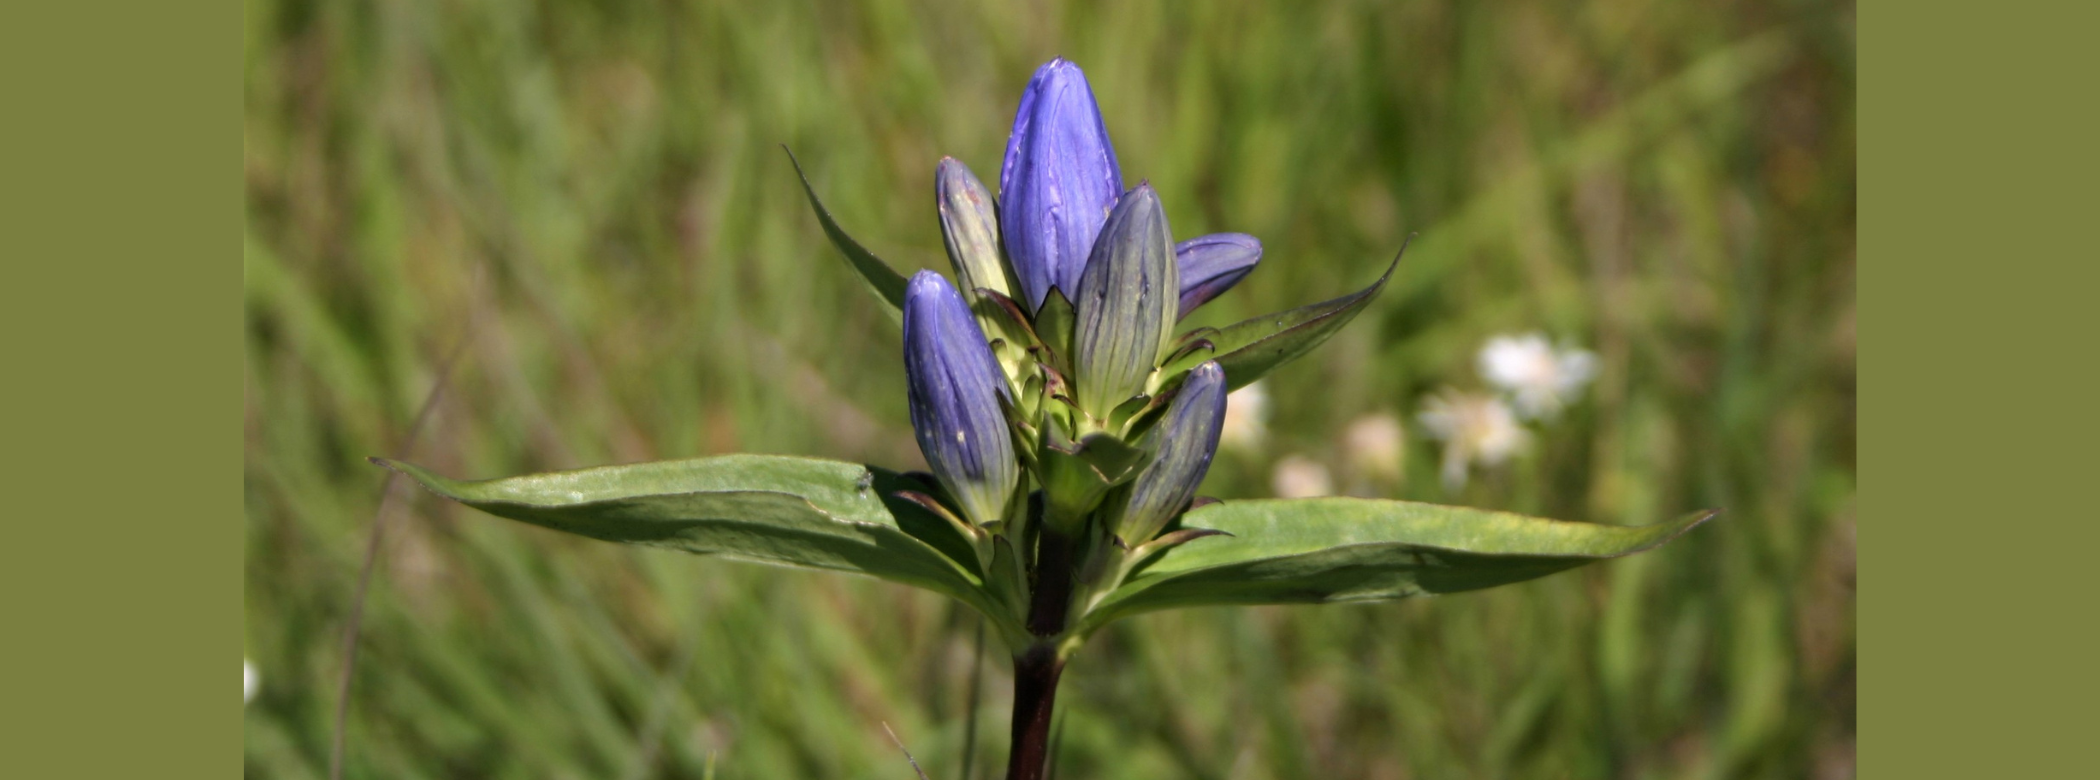 Close-up of a plant with a cluster of blue flowers that a shaped like a flower bud, instead of opened like a stereotypical flower.